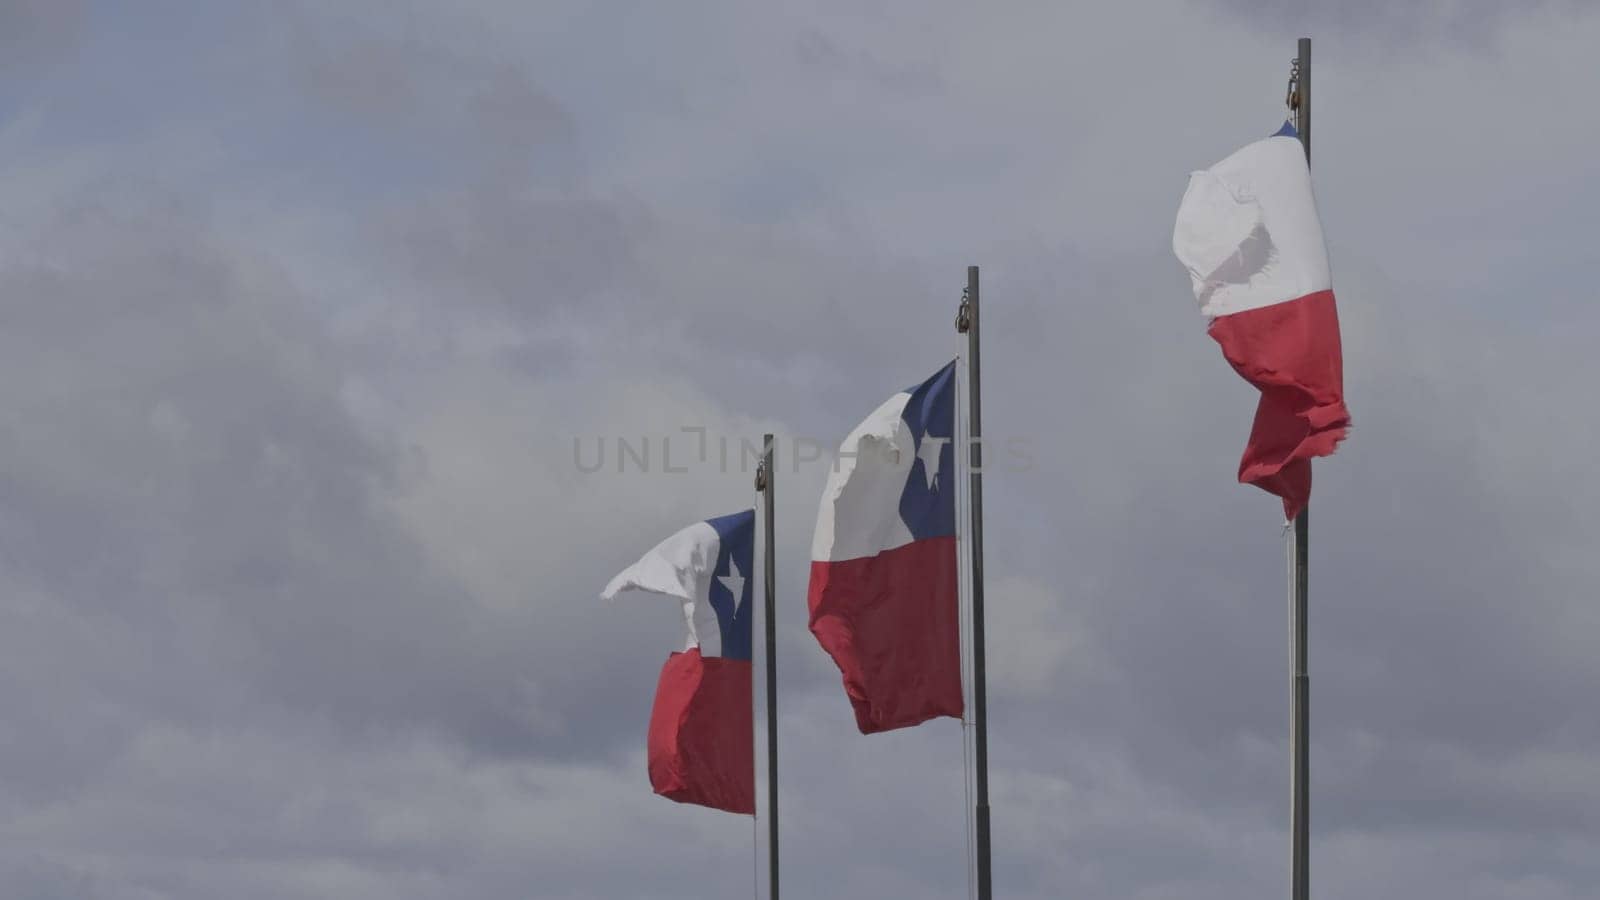 Three Chilean flags wave in the wind in slow-motion against a clear sky, positioned at different heights.